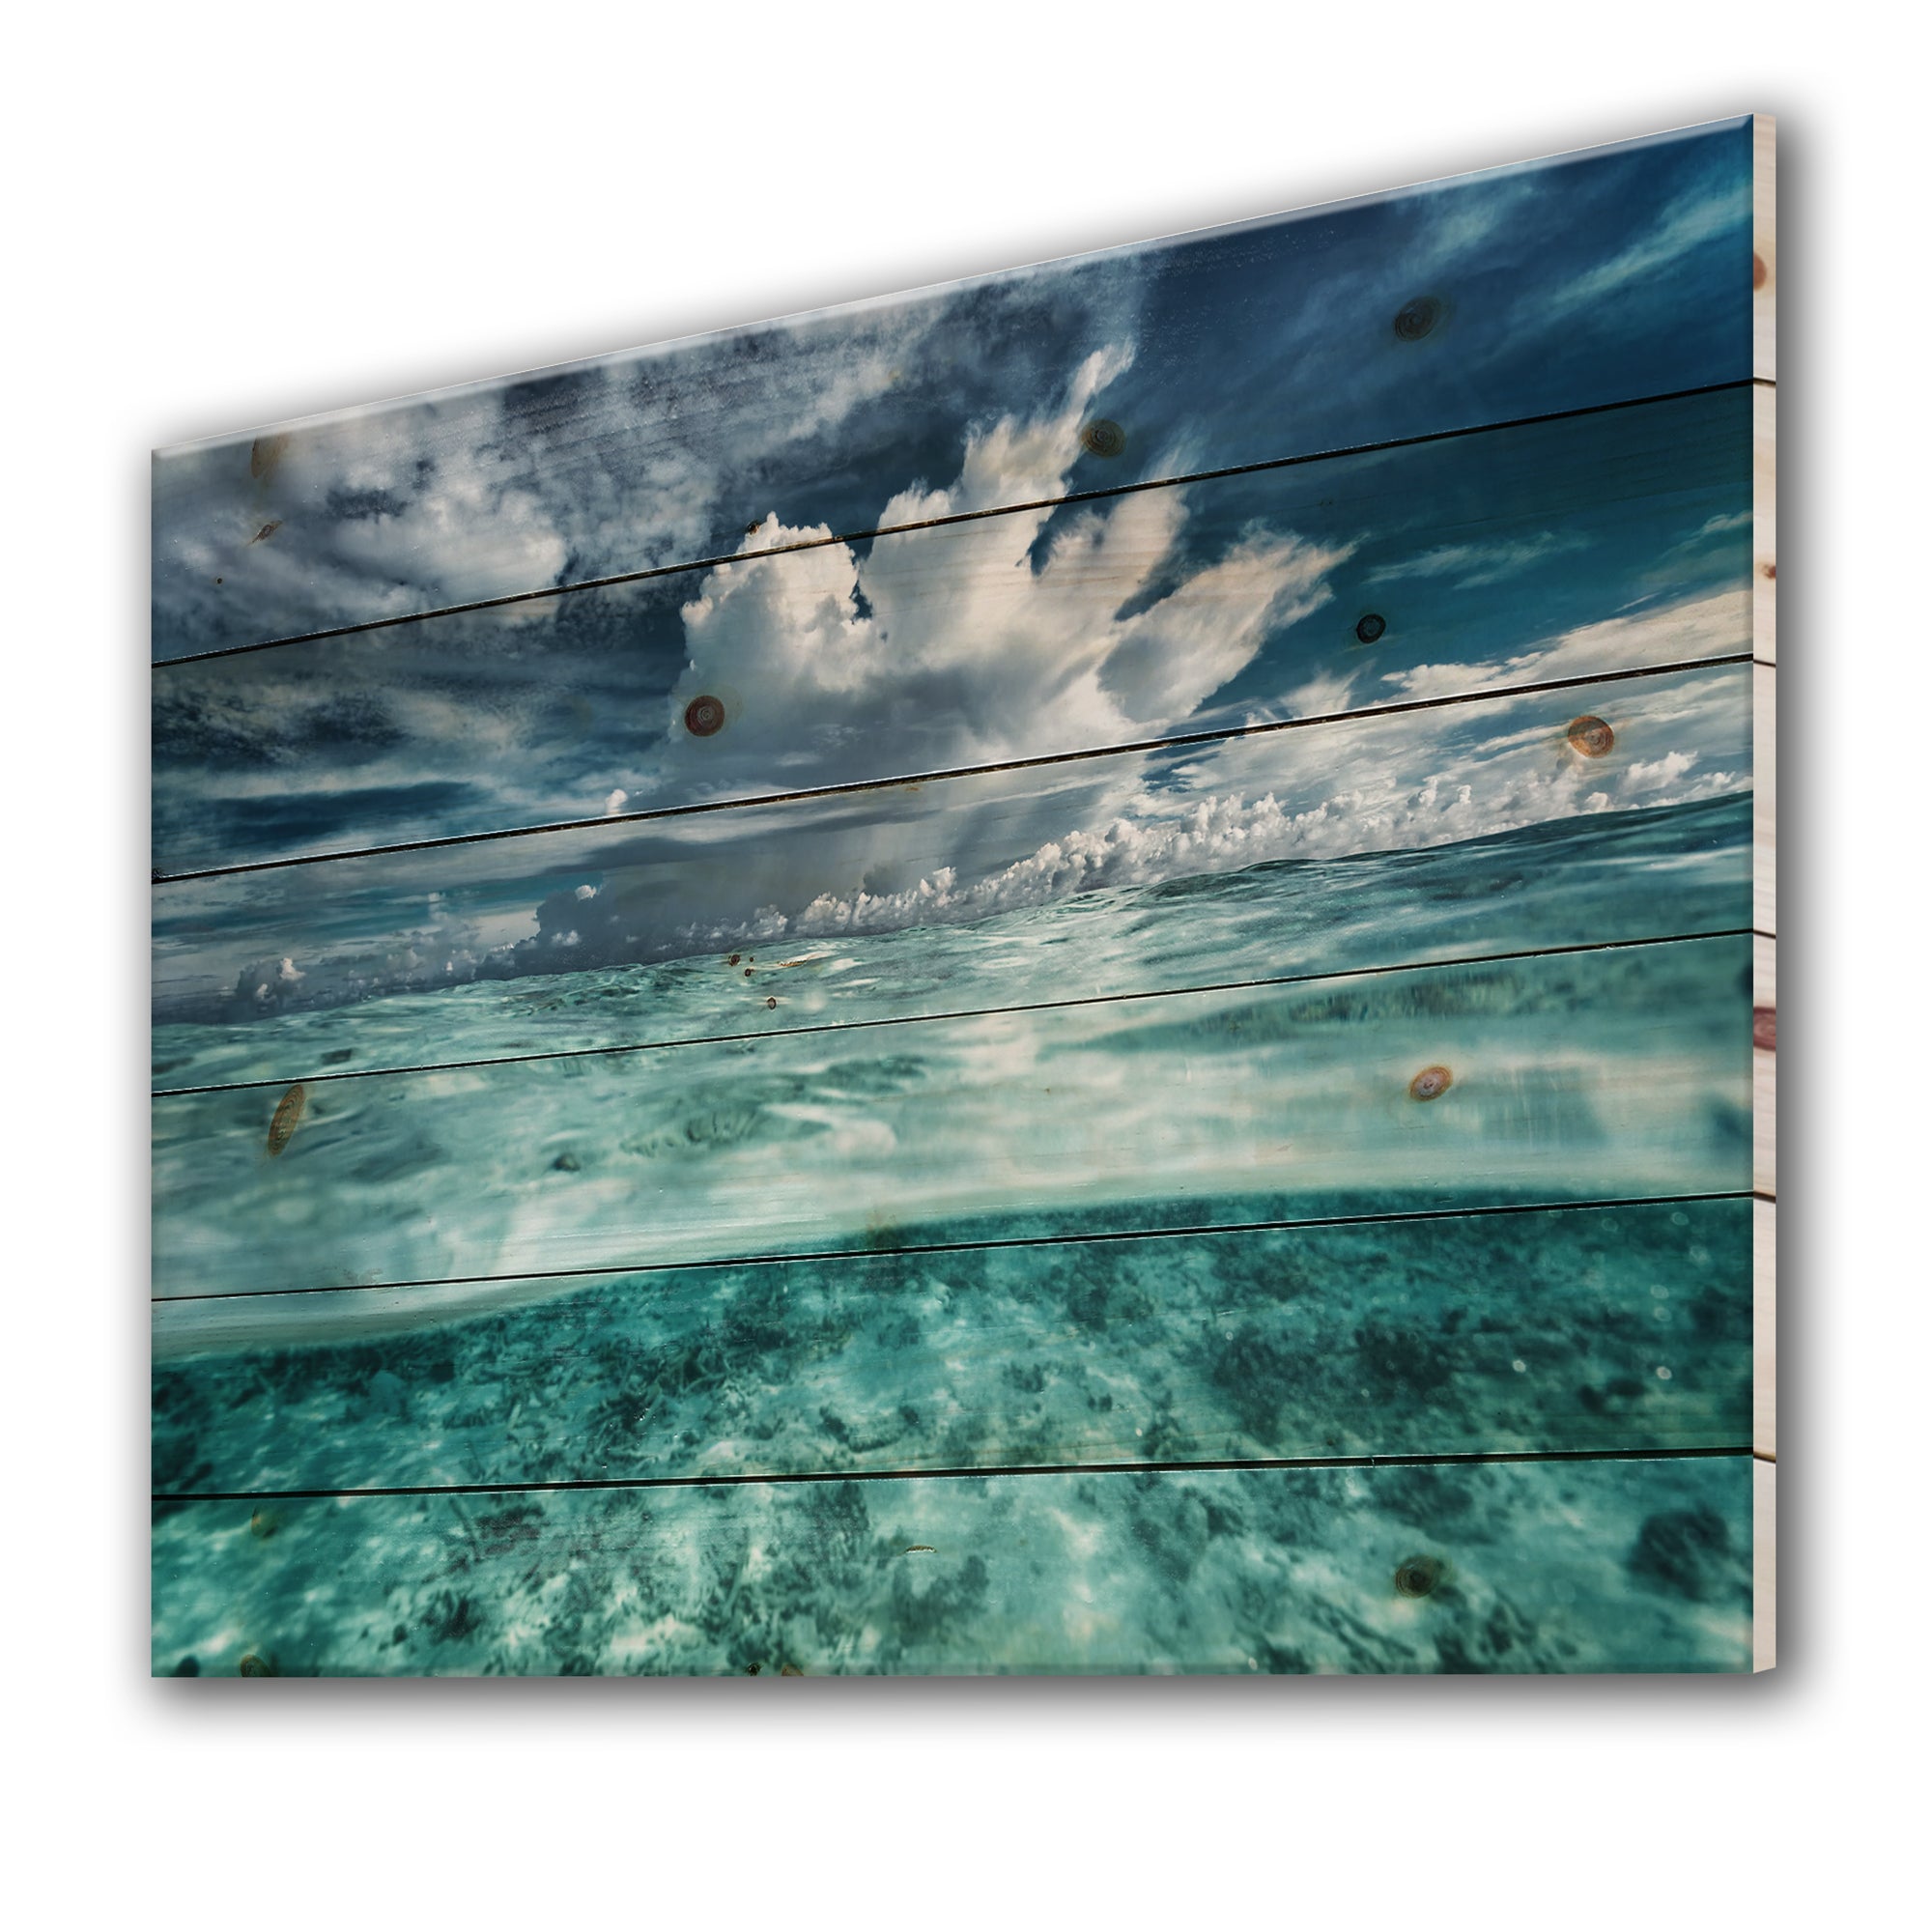 Amazing Underwater Seascape And Clouds - Nautical & Coastal Print on Natural Pine Wood